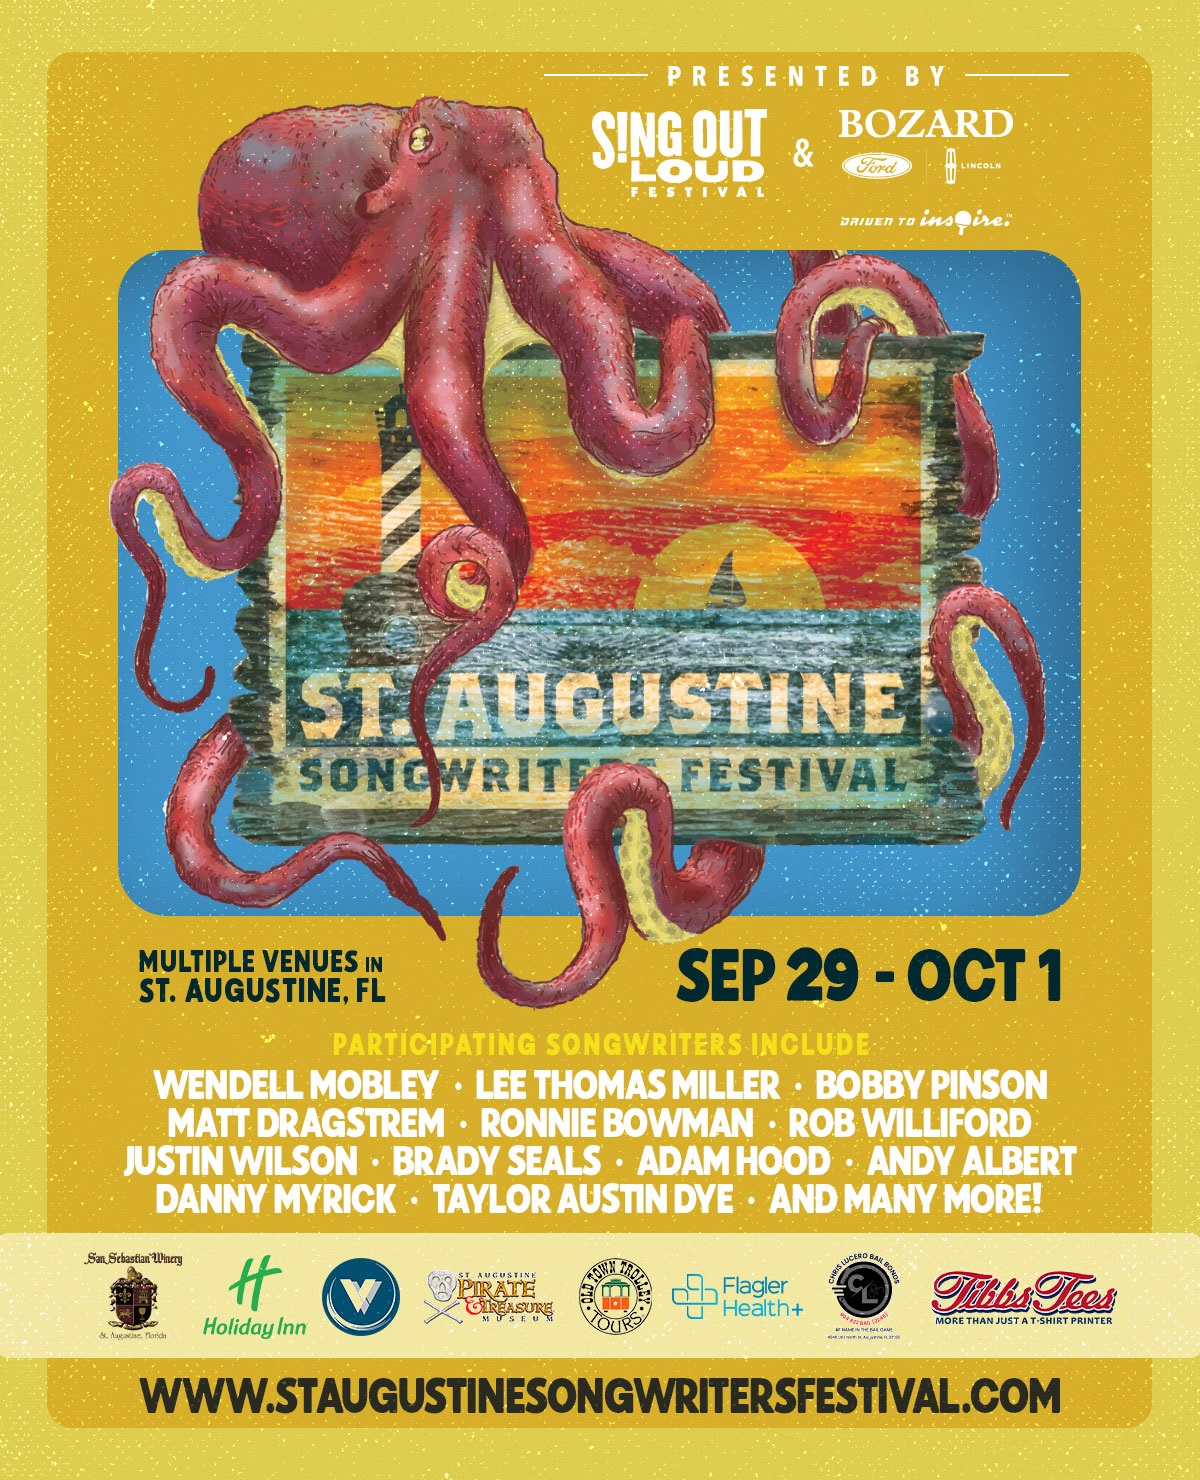 Sept. 29Oct. 1 St. Augustine Songwriters Festival features chart